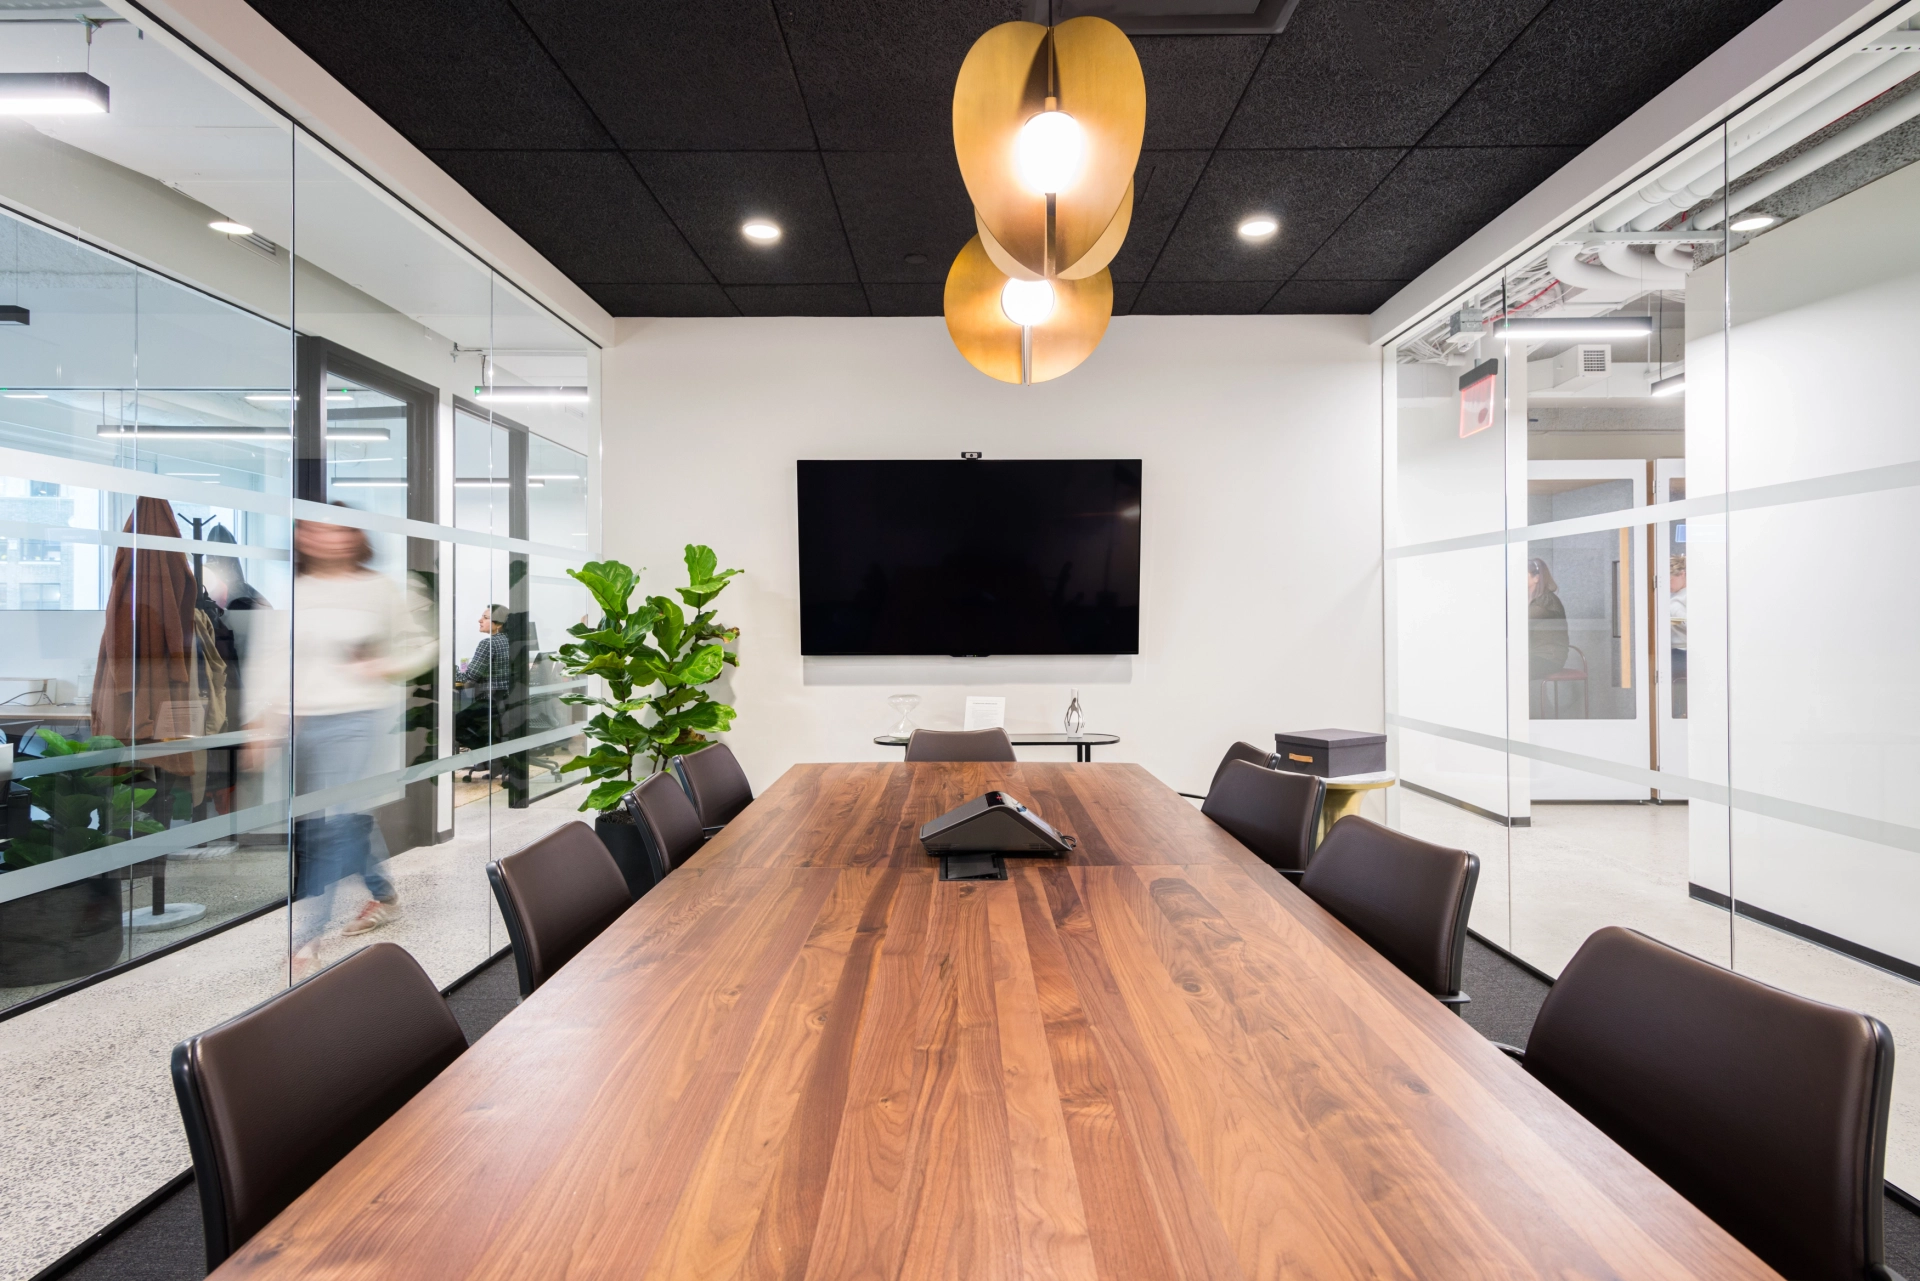 A meeting room in Nashville equipped with a wooden table and chairs, serving as a professional workspace.